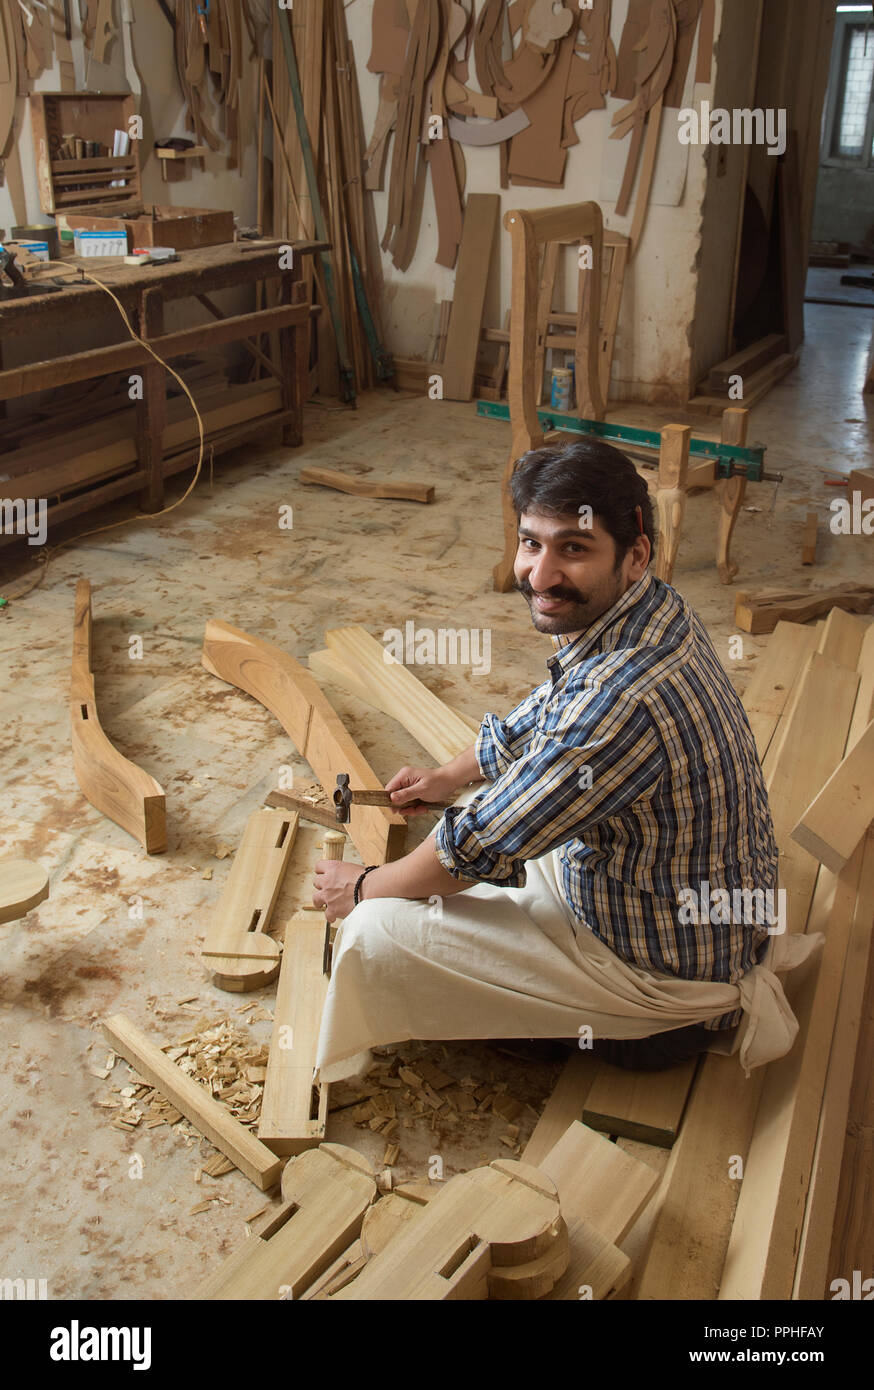 Smiling carpenter working on wood with a chisel and hammer sitting in his workshop. Stock Photo